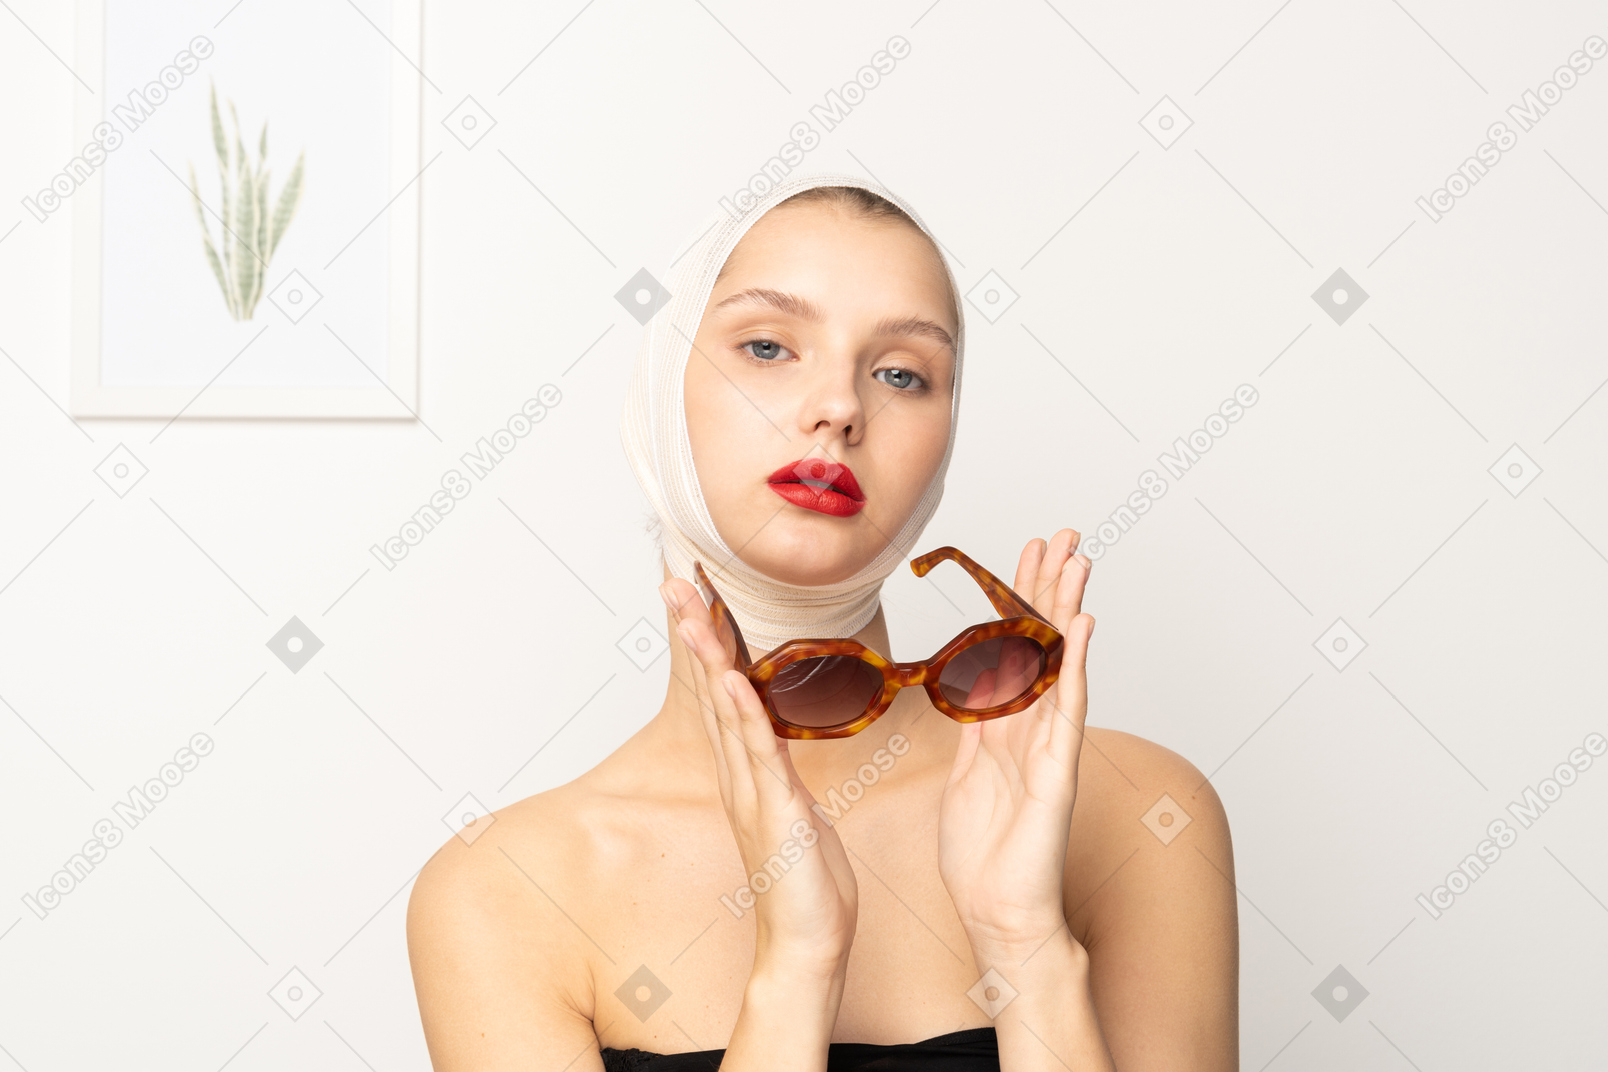 Young woman with bandaged head holding sunglasses